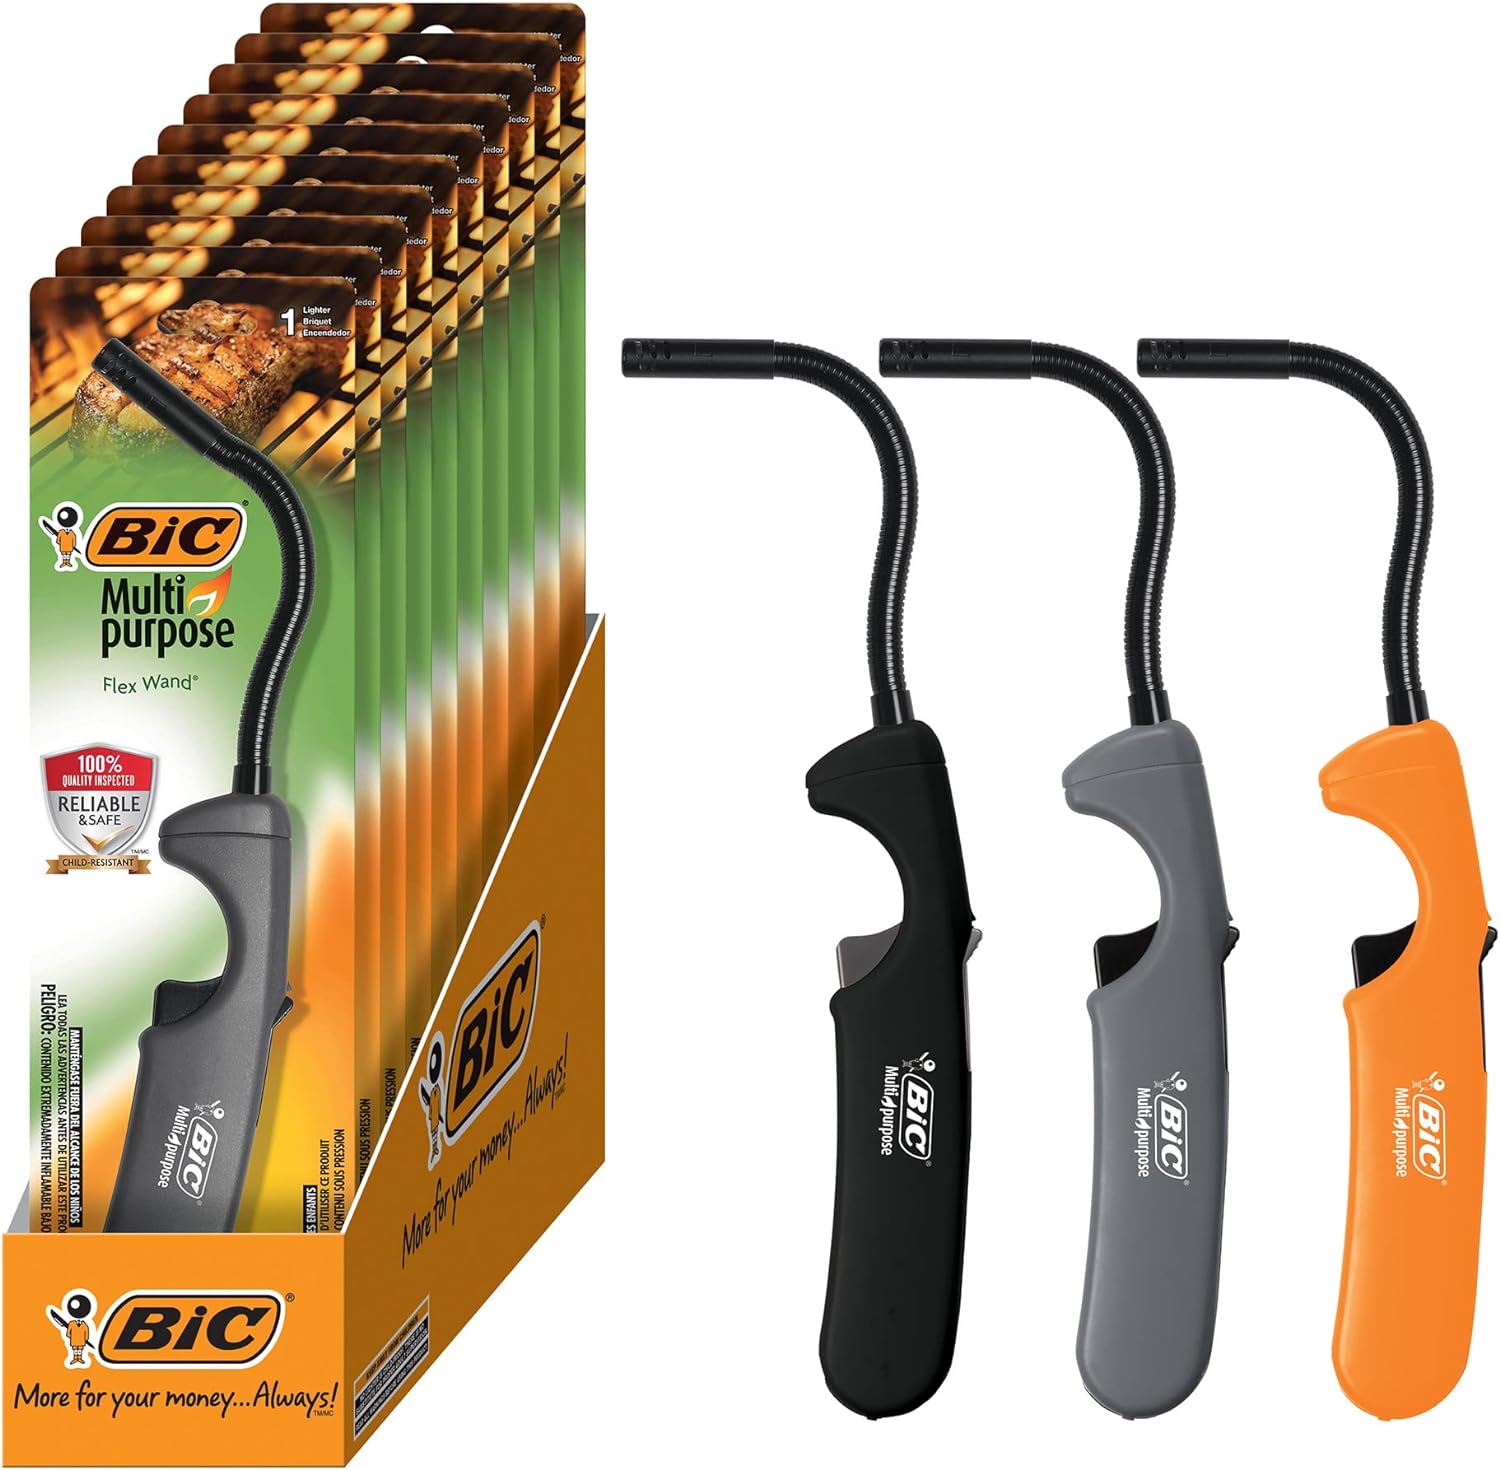 BIC Multi Purpose Lighter with Flexible Metal Wand, Classic Collection, Great Lighter for Candles, Grills and Fireplaces, 10 Count Pack of Lighters